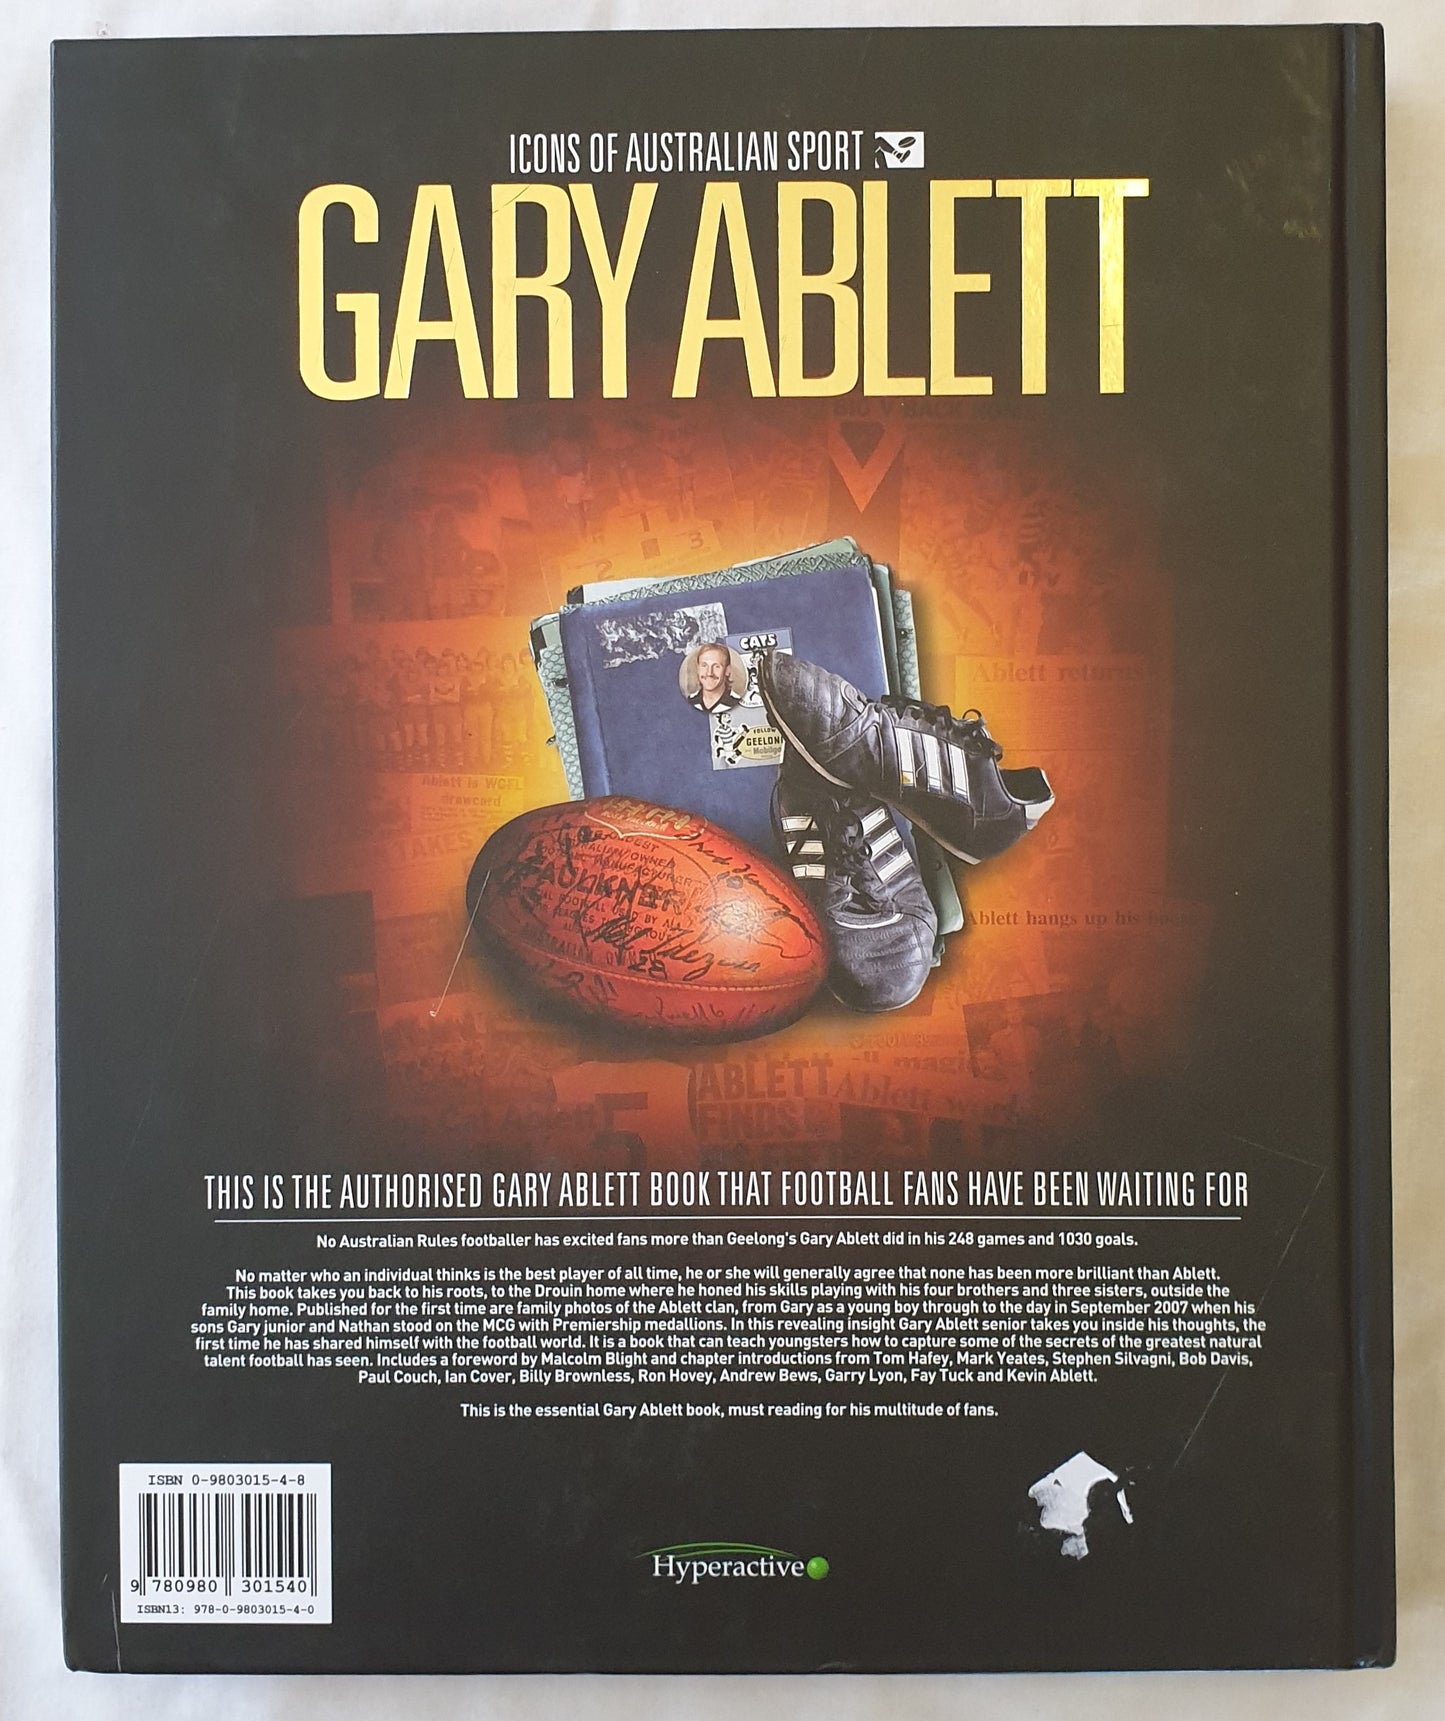 Gary Ablett  Chronicling His Football Career Using His Scrapbooks and Memorabilia:  An Authorised Portrait